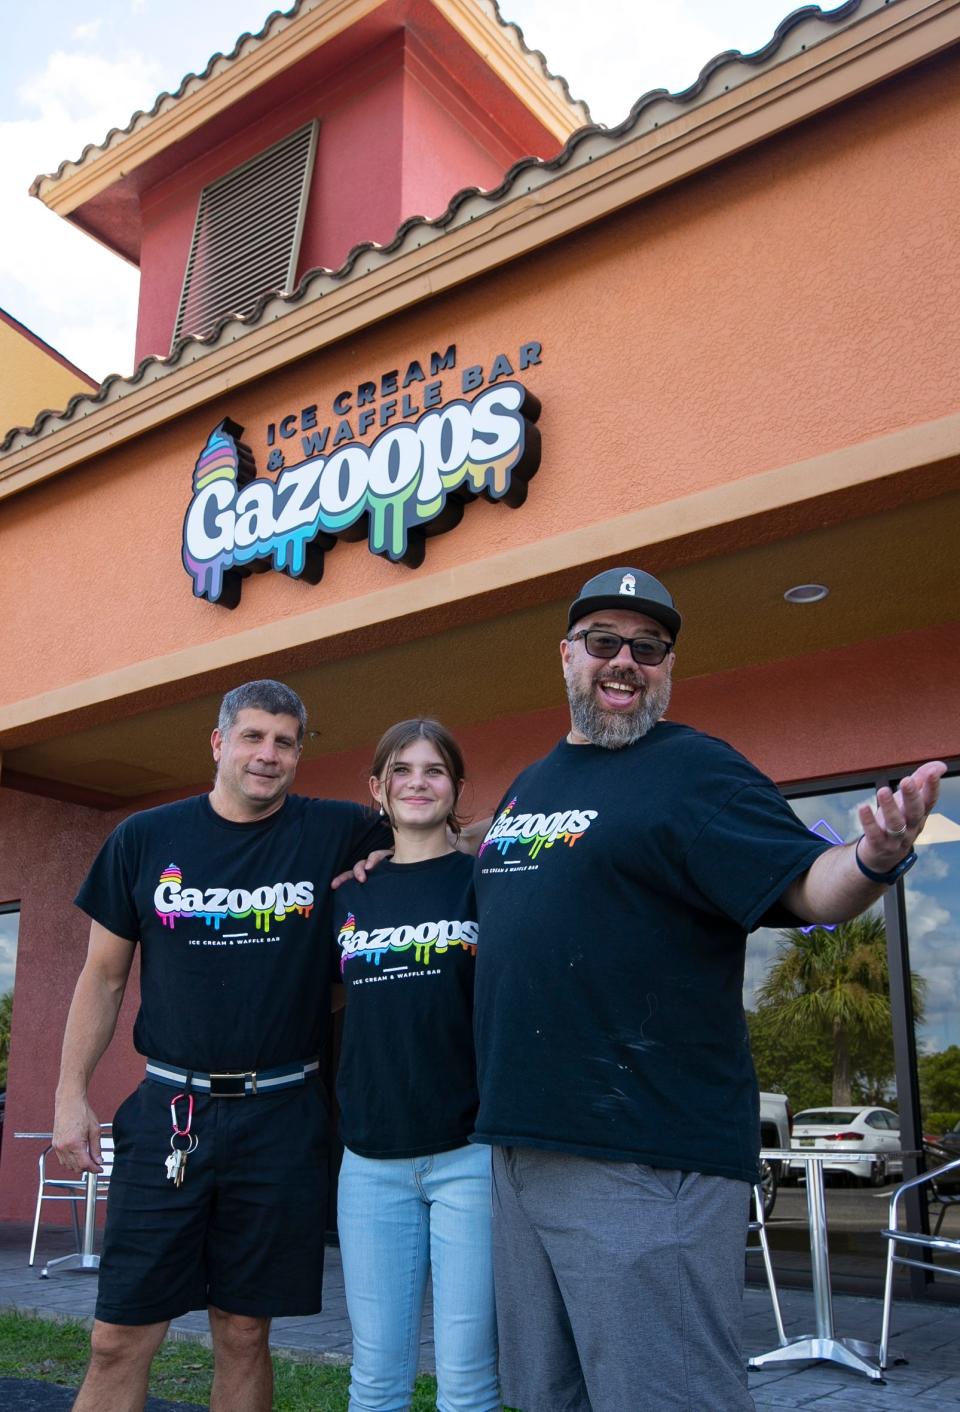 Mike LaVina, left, and Darren Hussien are co-owners of Gazoops Ice Cream and Waffle Bar in Cape Coral. Hussien's daughter Teegan Nichols, 12, poses with them.